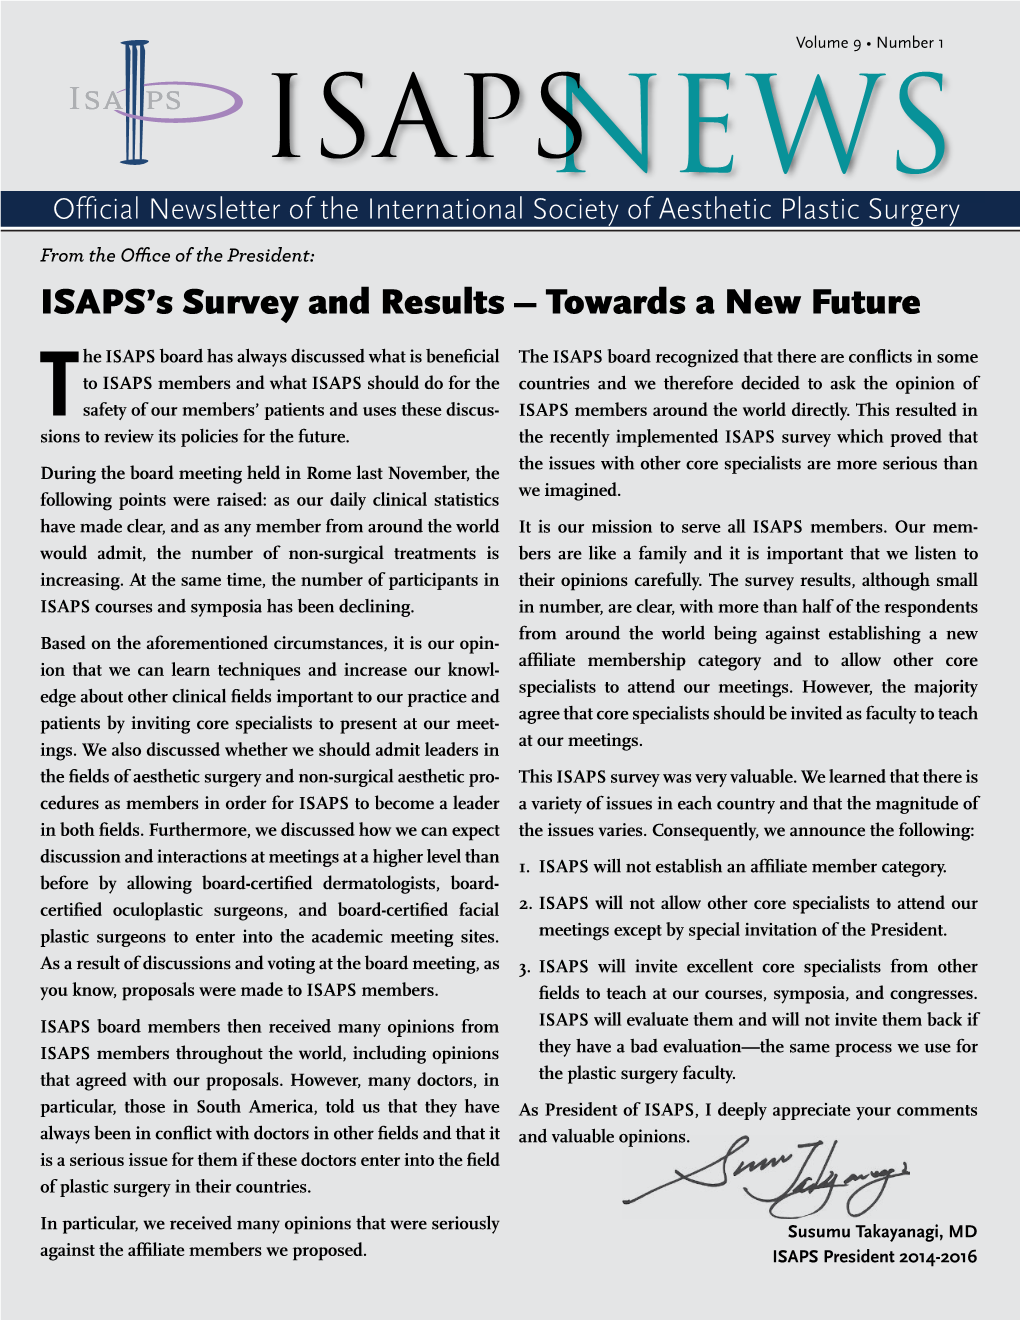 ISAPS's Survey and Results